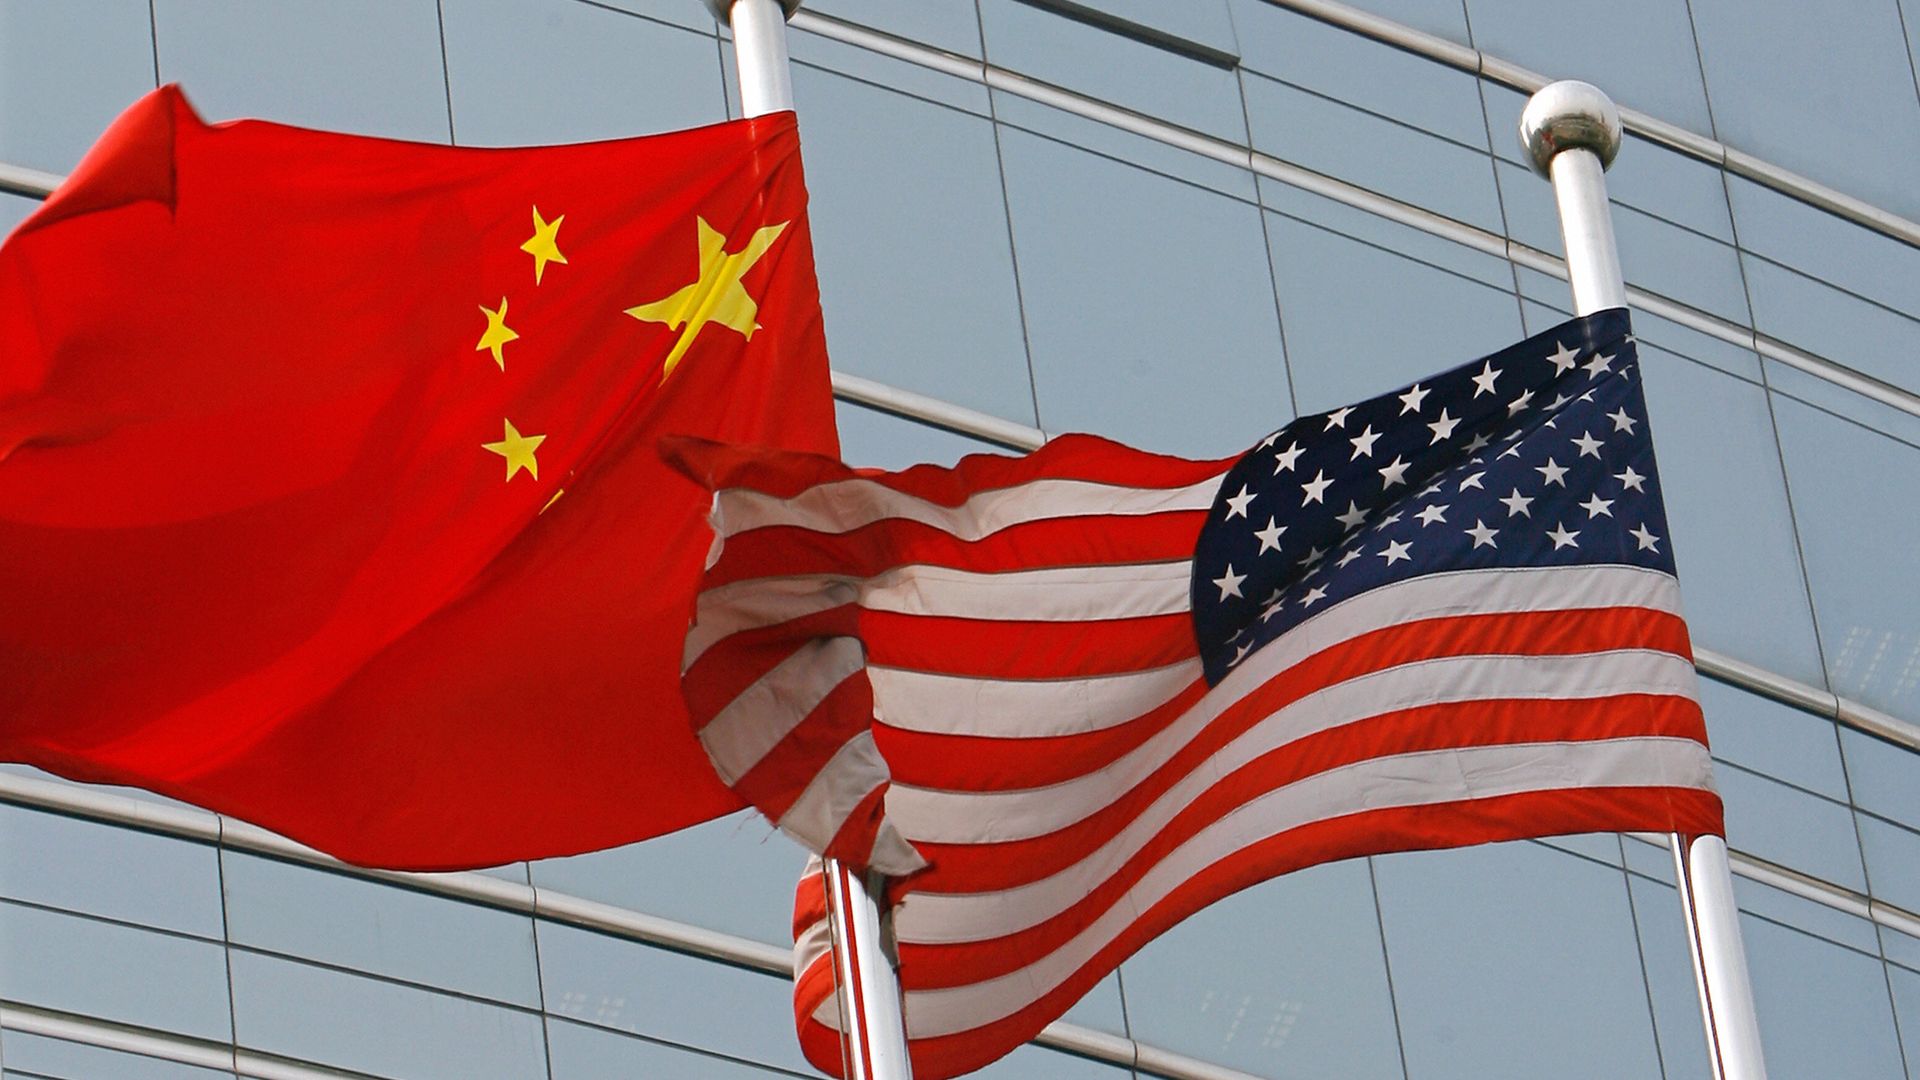 A US and a Chinese flag wave side by side